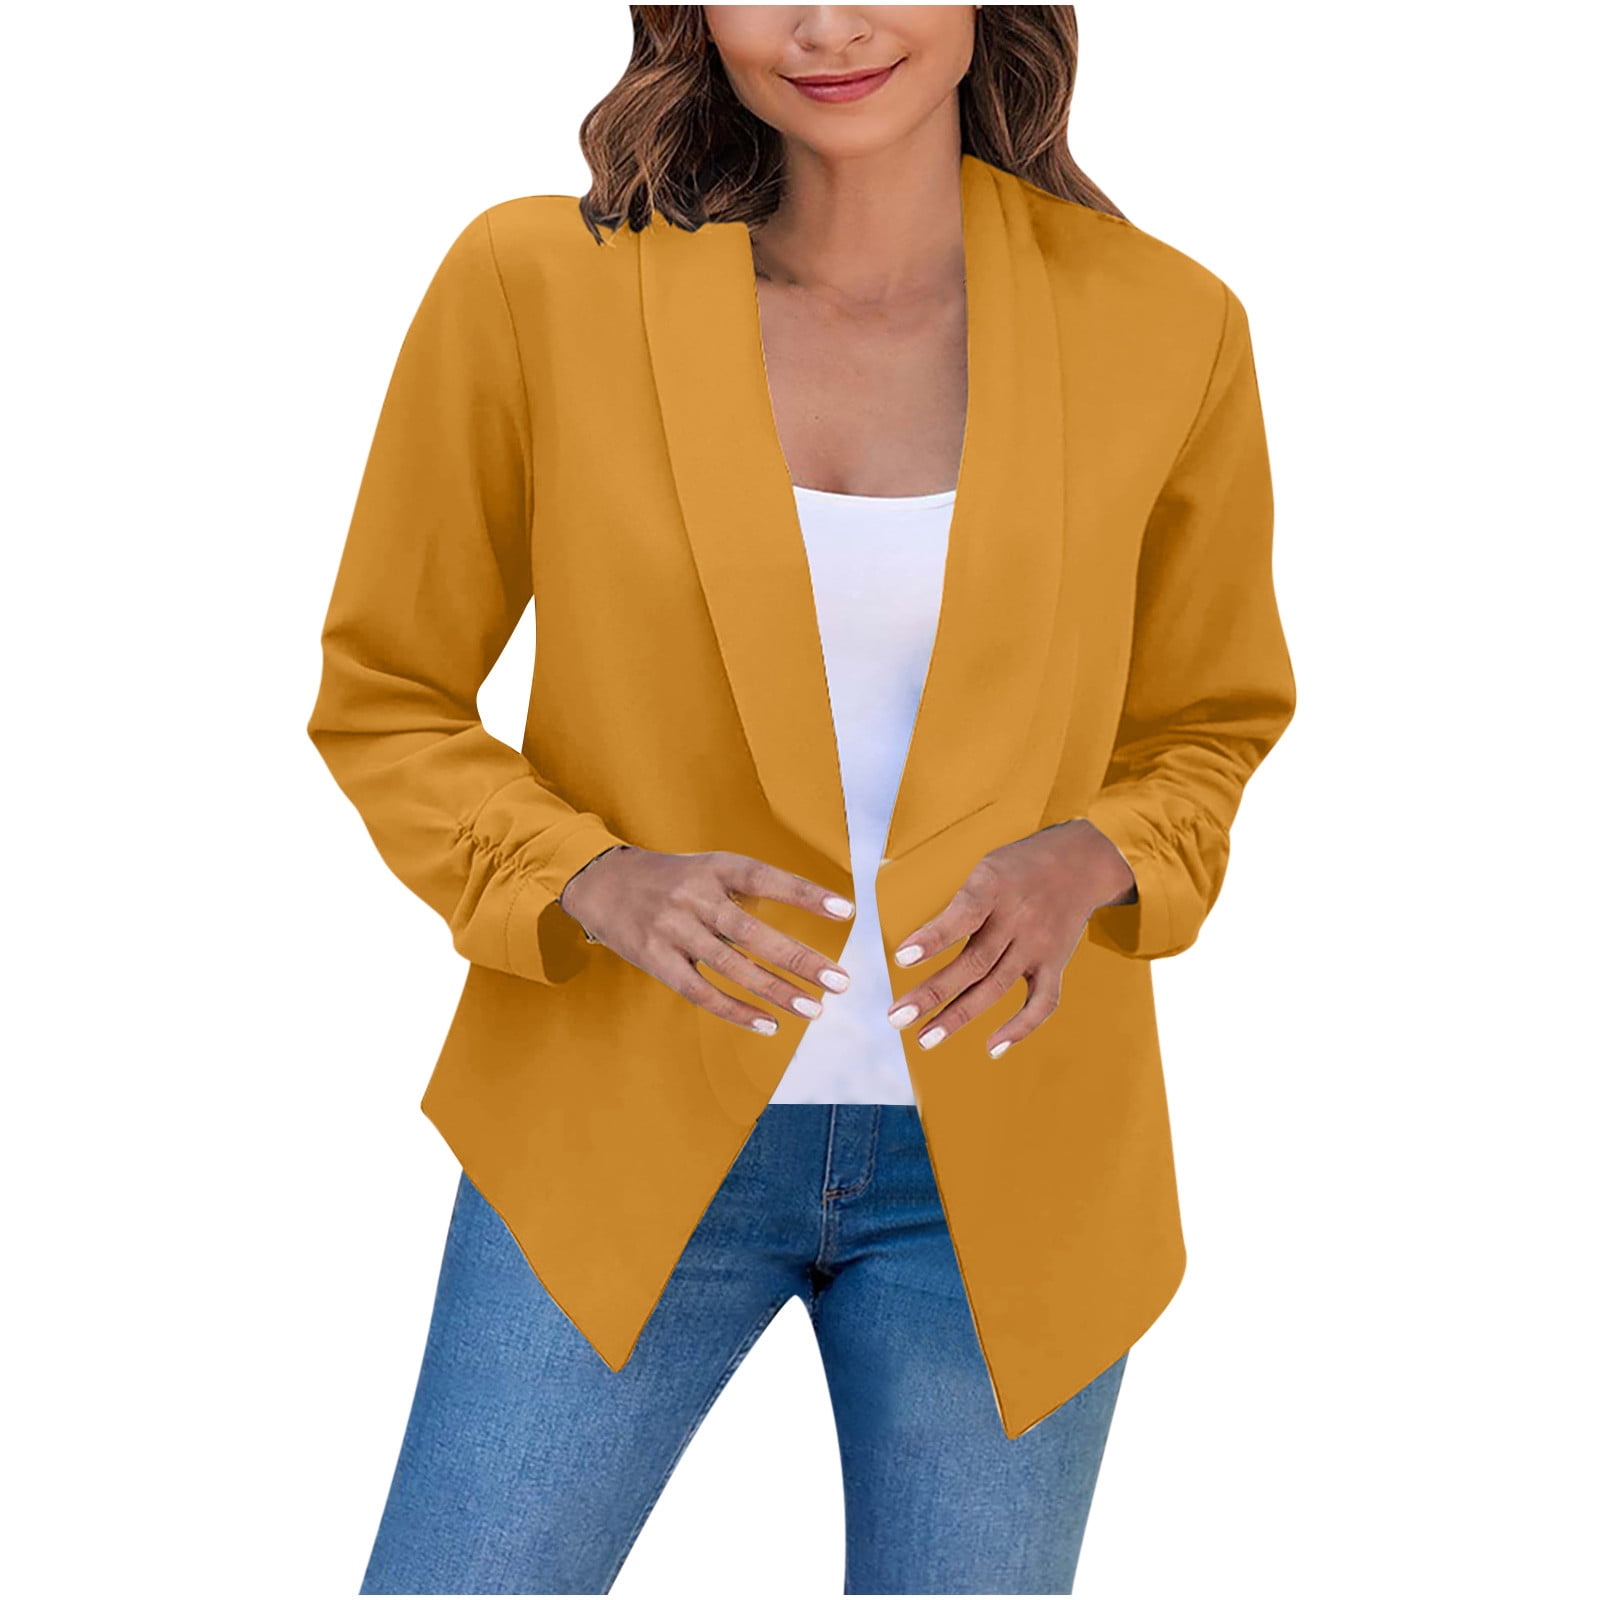 Koodred Womens Casual Work Office Open Front Long Sleeve Lightweight Loose Fit Blazer Jacket Cardigan Suit 